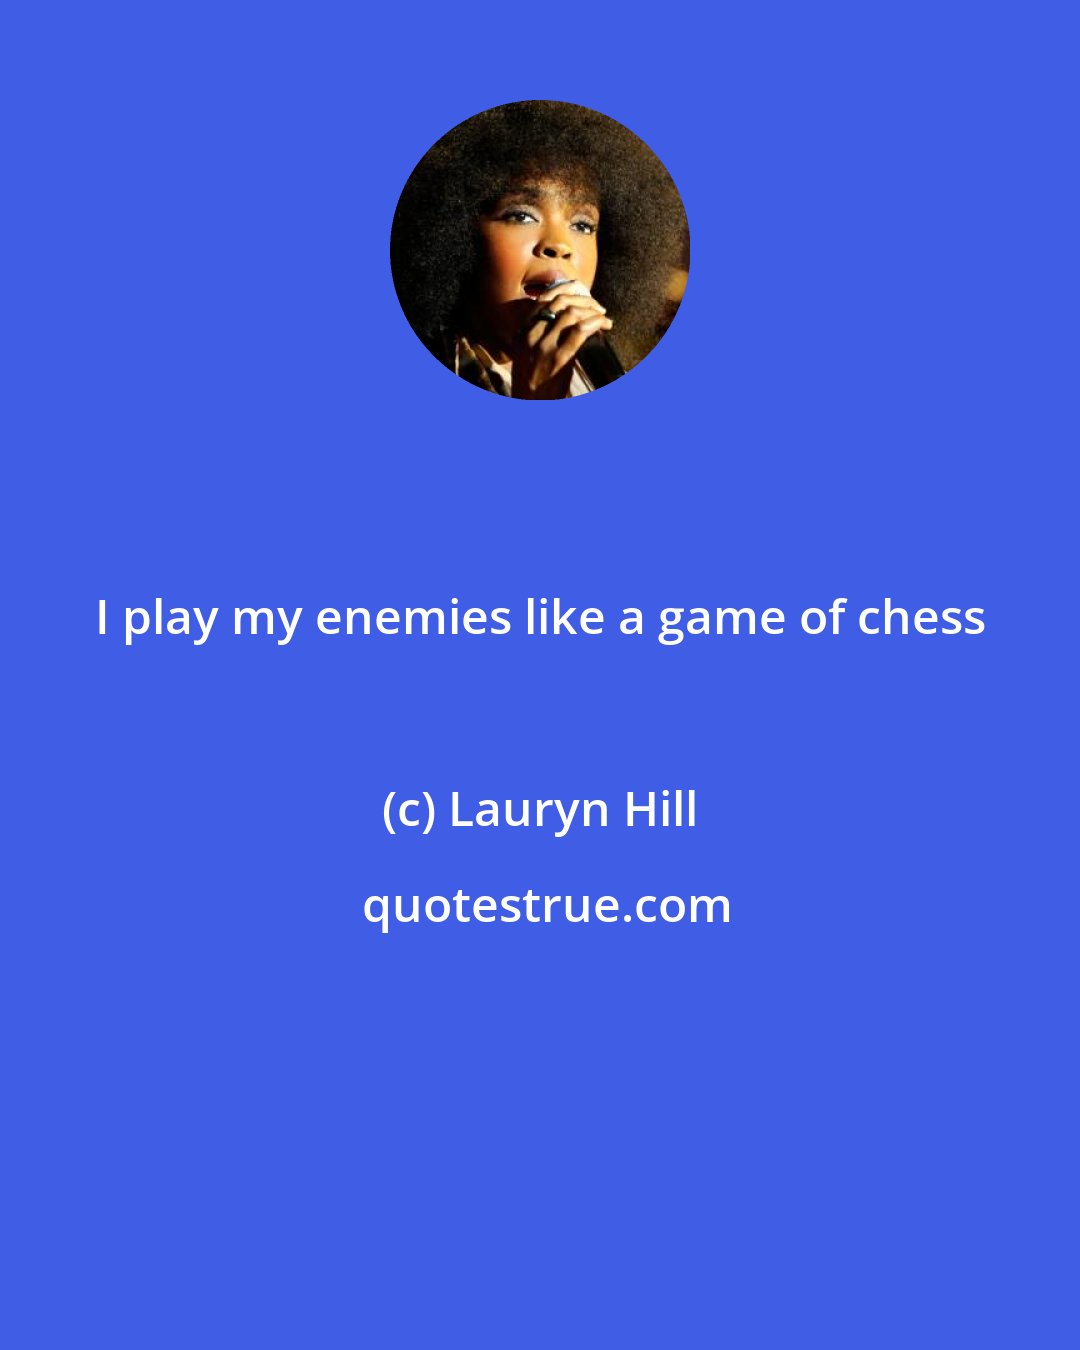 Lauryn Hill: I play my enemies like a game of chess